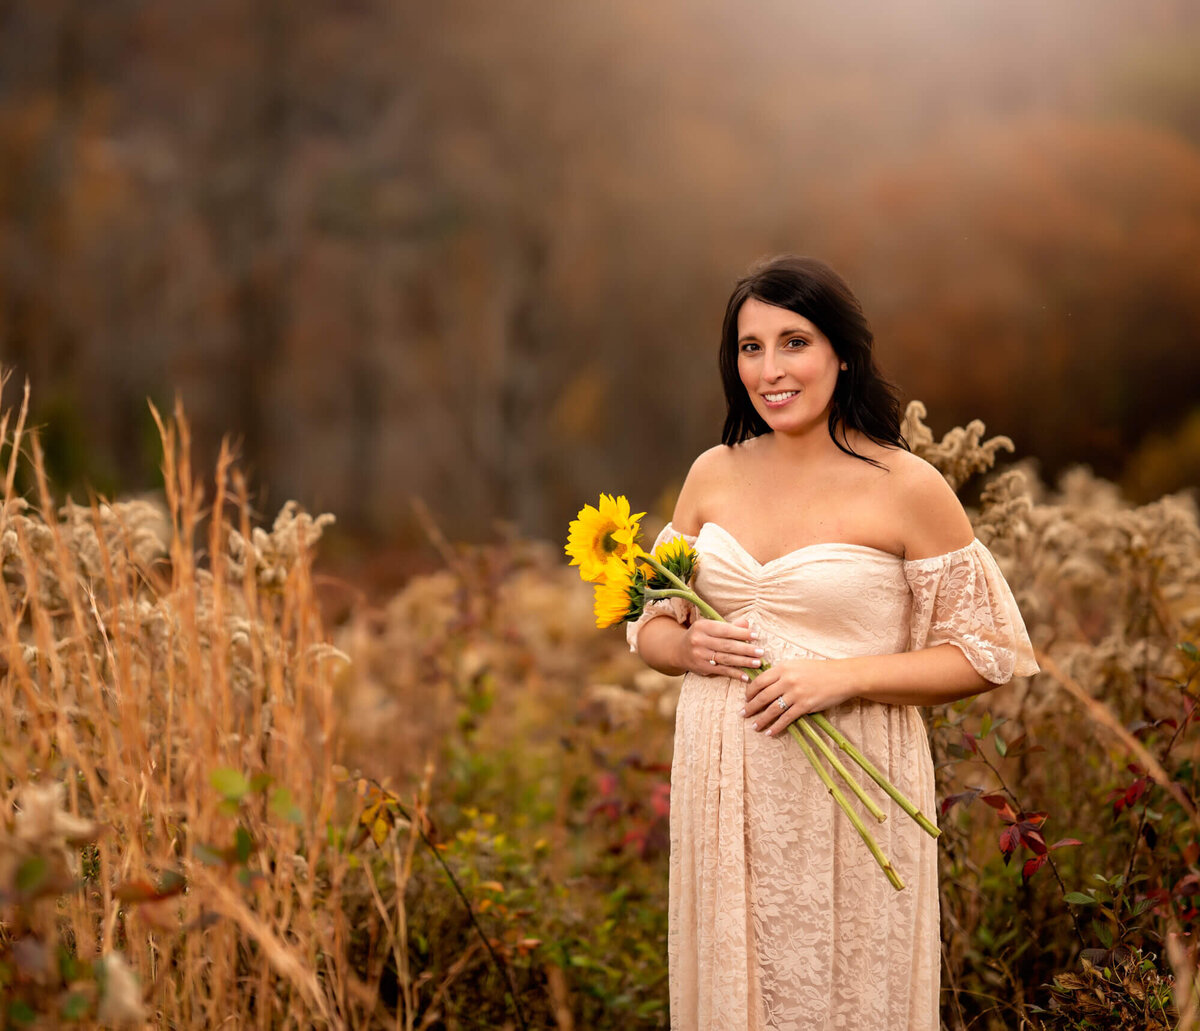 A lovely young expecting mama smiles and holds sunflowers across her belly